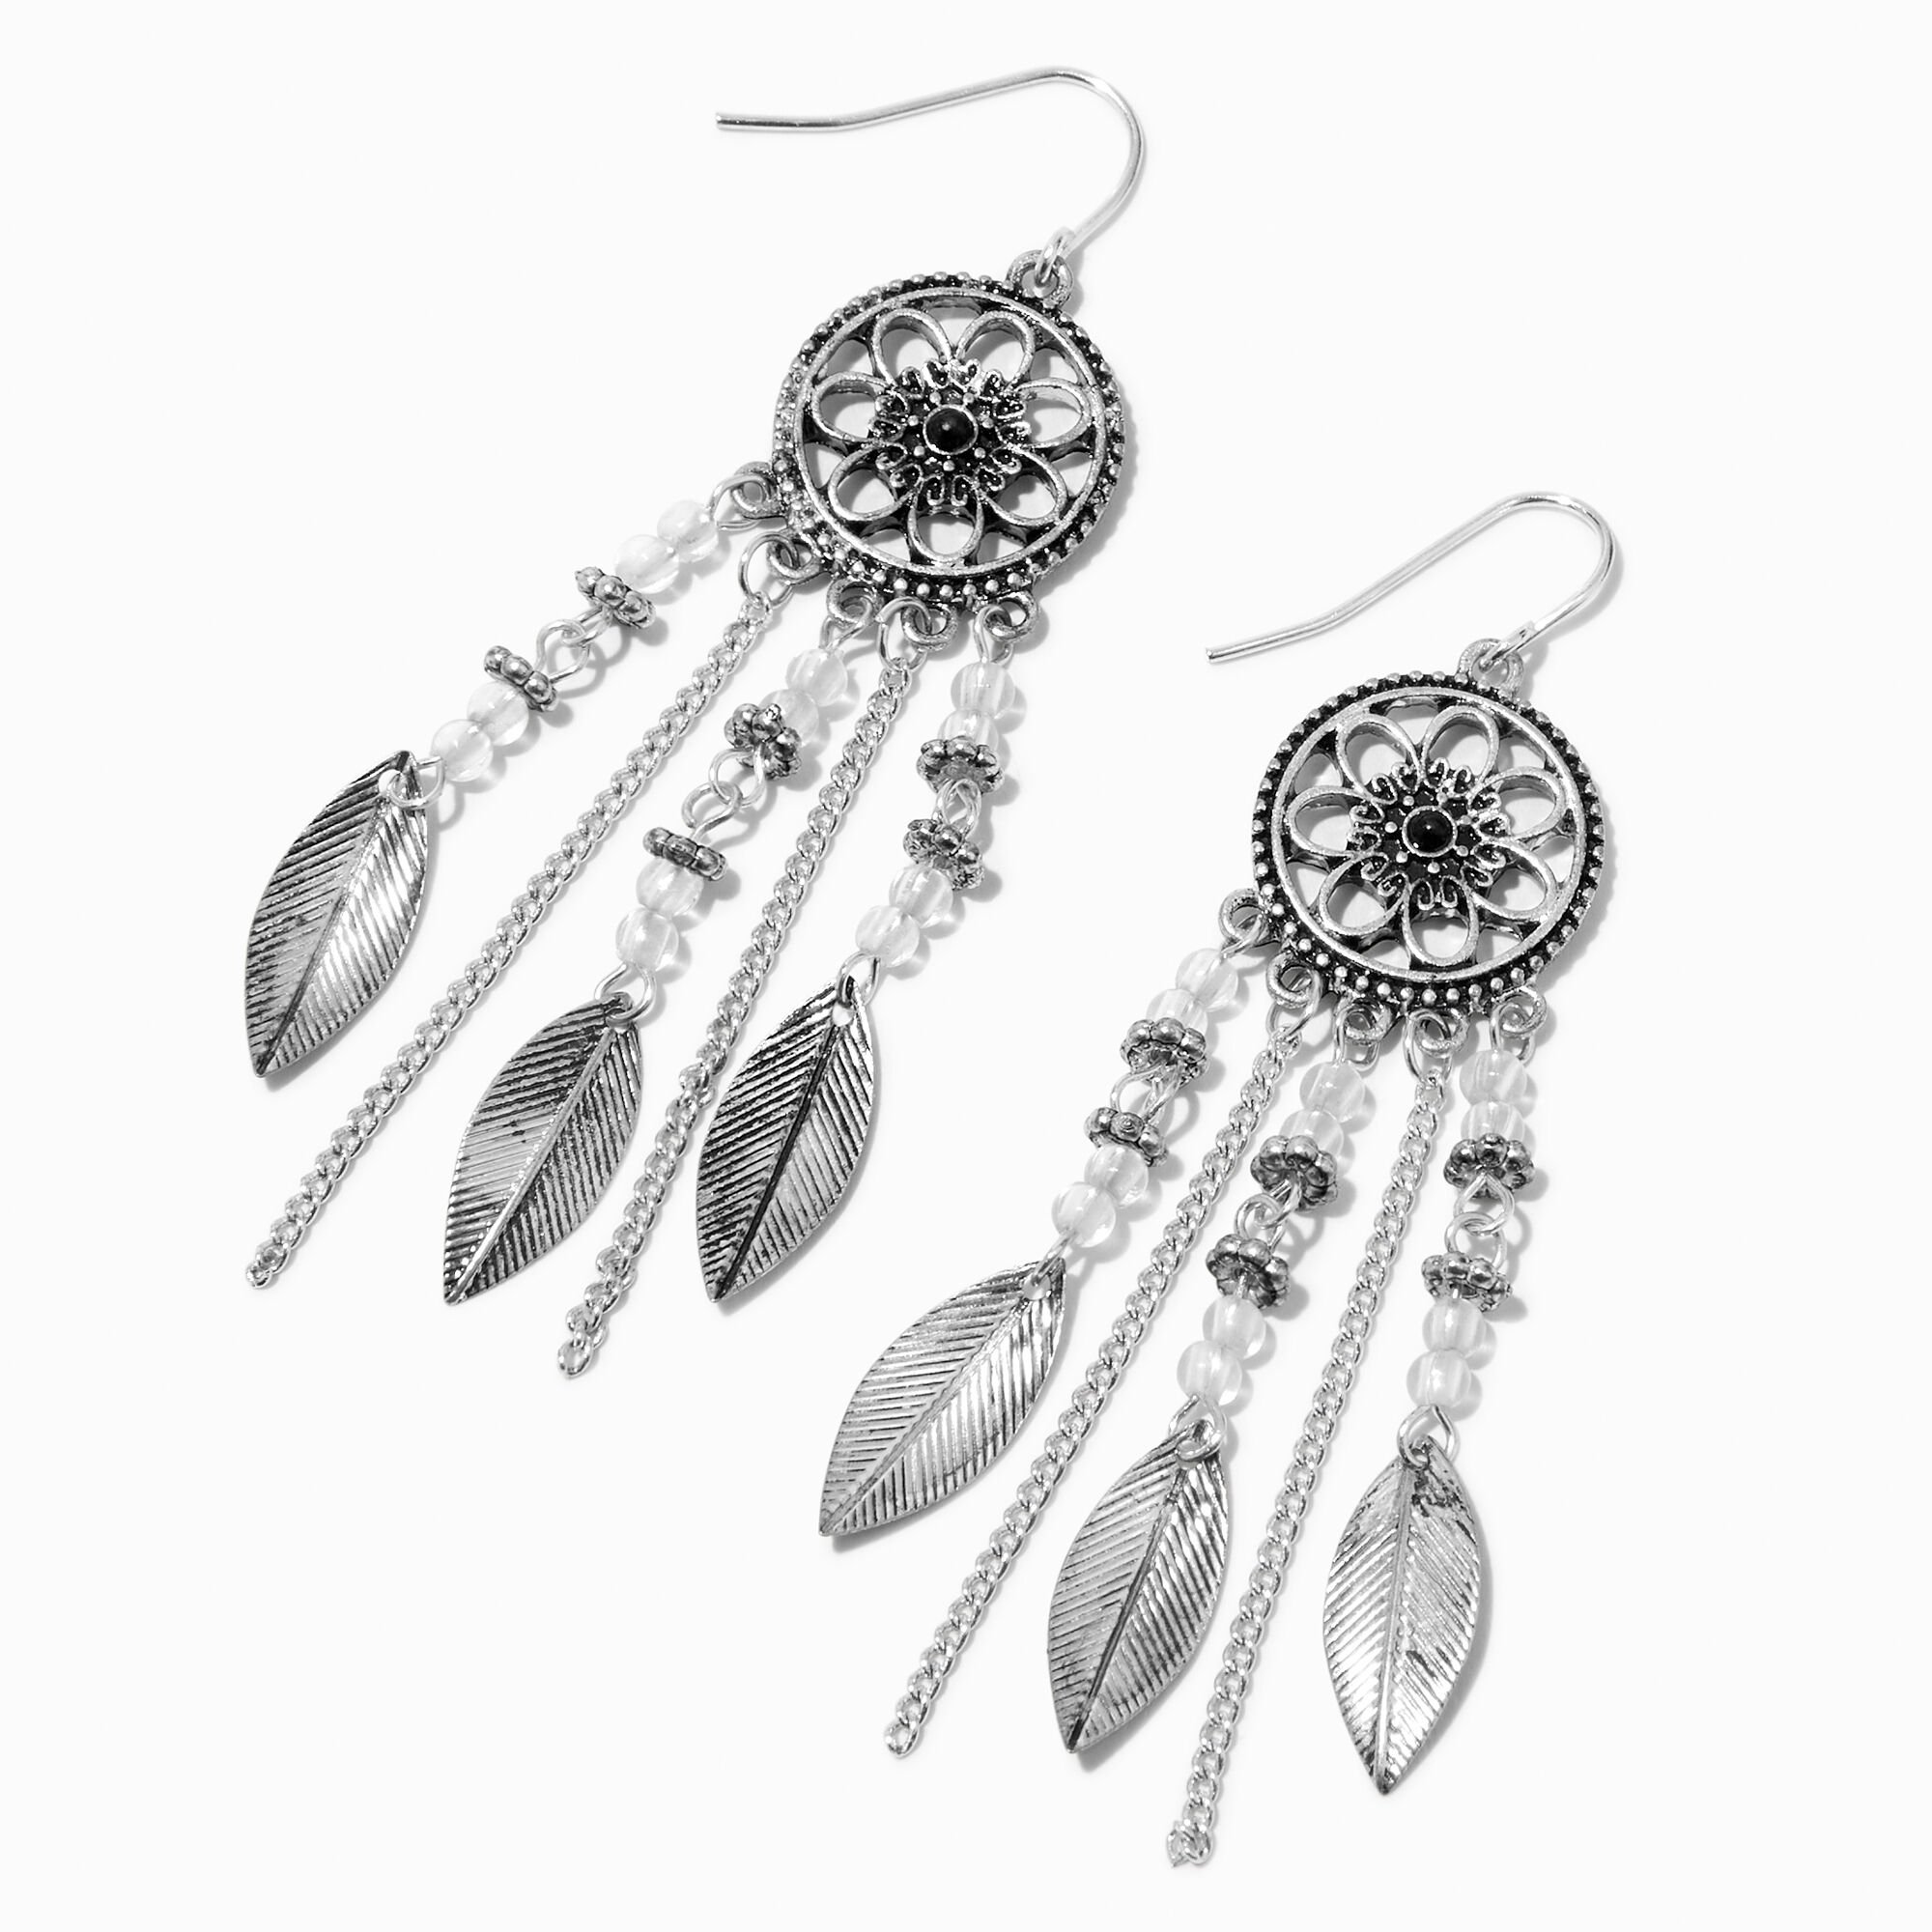 View Claires Tone 3 Flower Leaf Beaded Dreamcatcher Drop Earrings Silver information